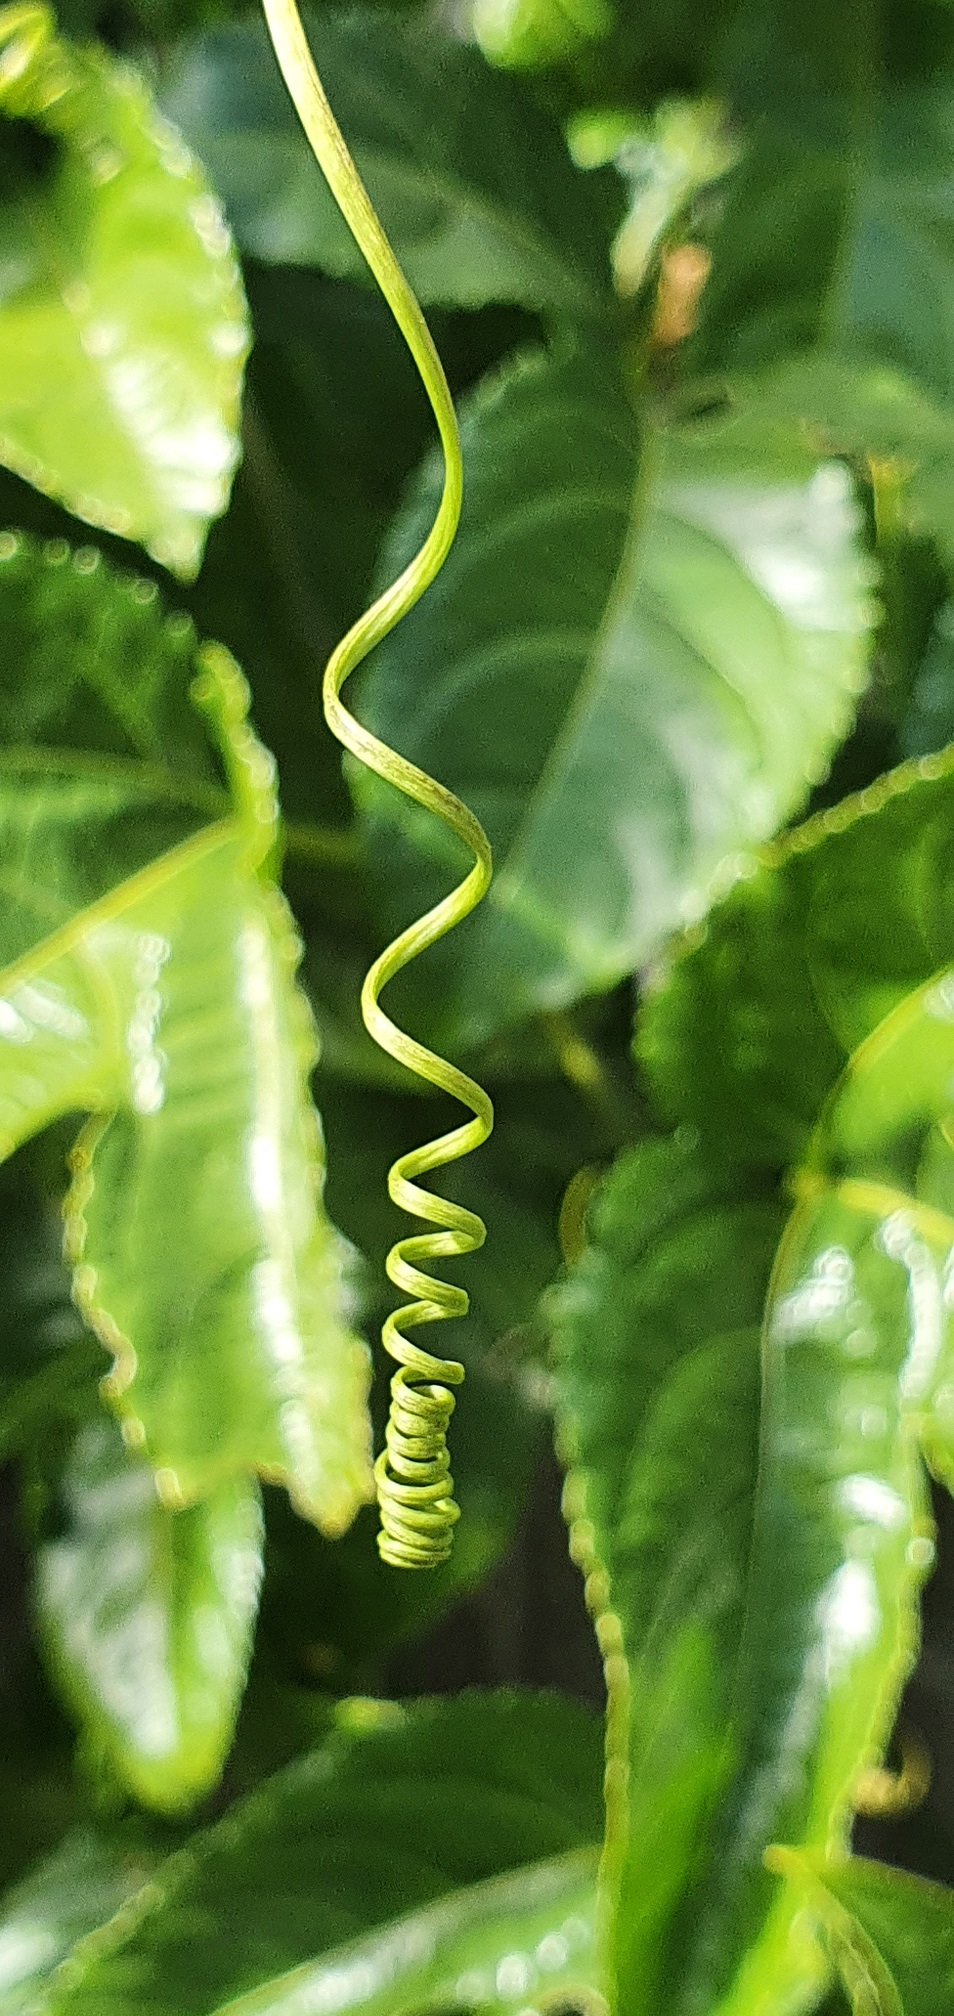 Name: Eleanor. Prize: Second. I found this in my backyard growing on the passionfruit vine. I could see other ones wrapped around the wire fence holding up the vine. It looks like a corkscrew and this shape is called a helix in maths.